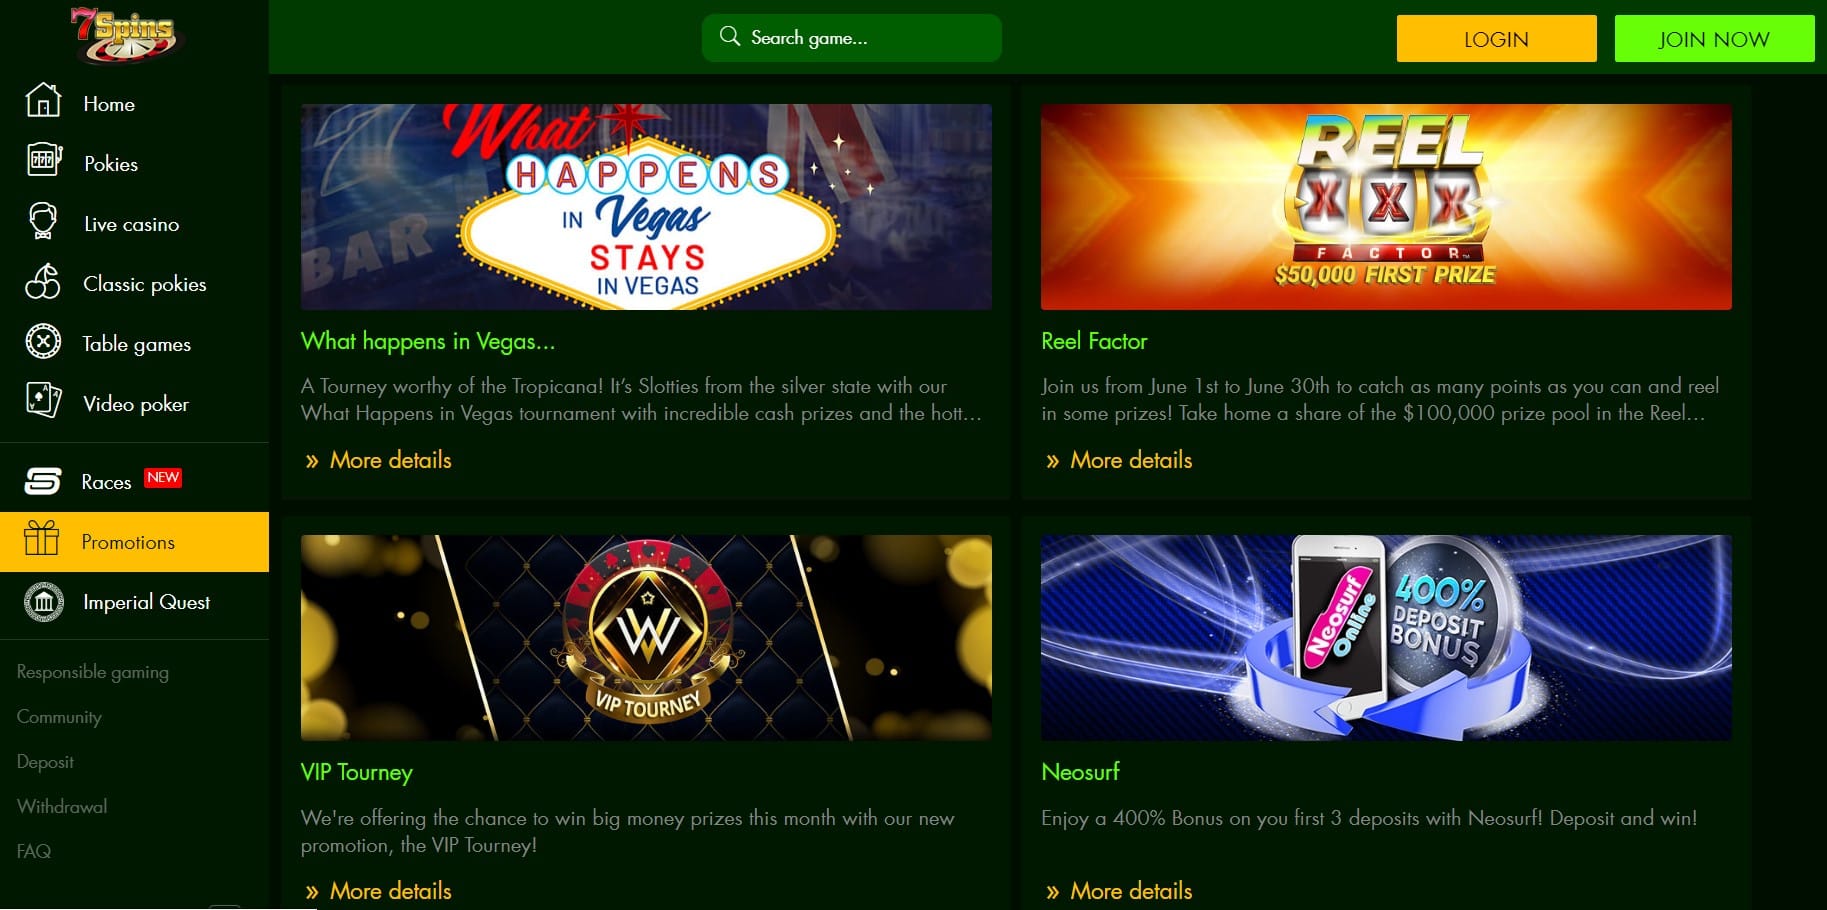 7spins Casino Promotions